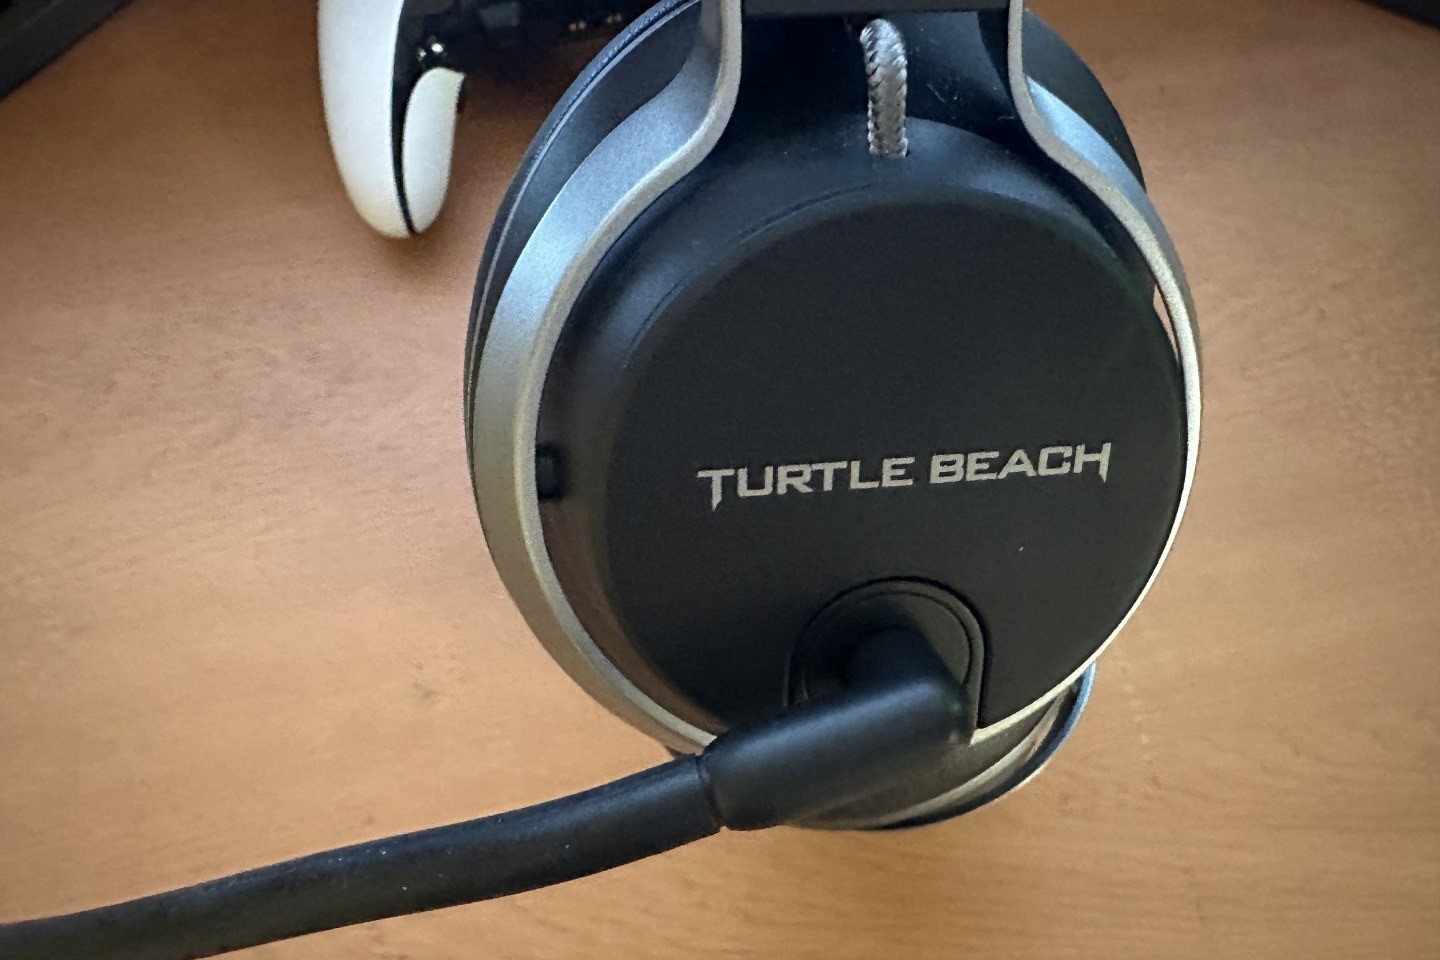 Turtle Beach Echo Woes: Troubleshooting And Solutions